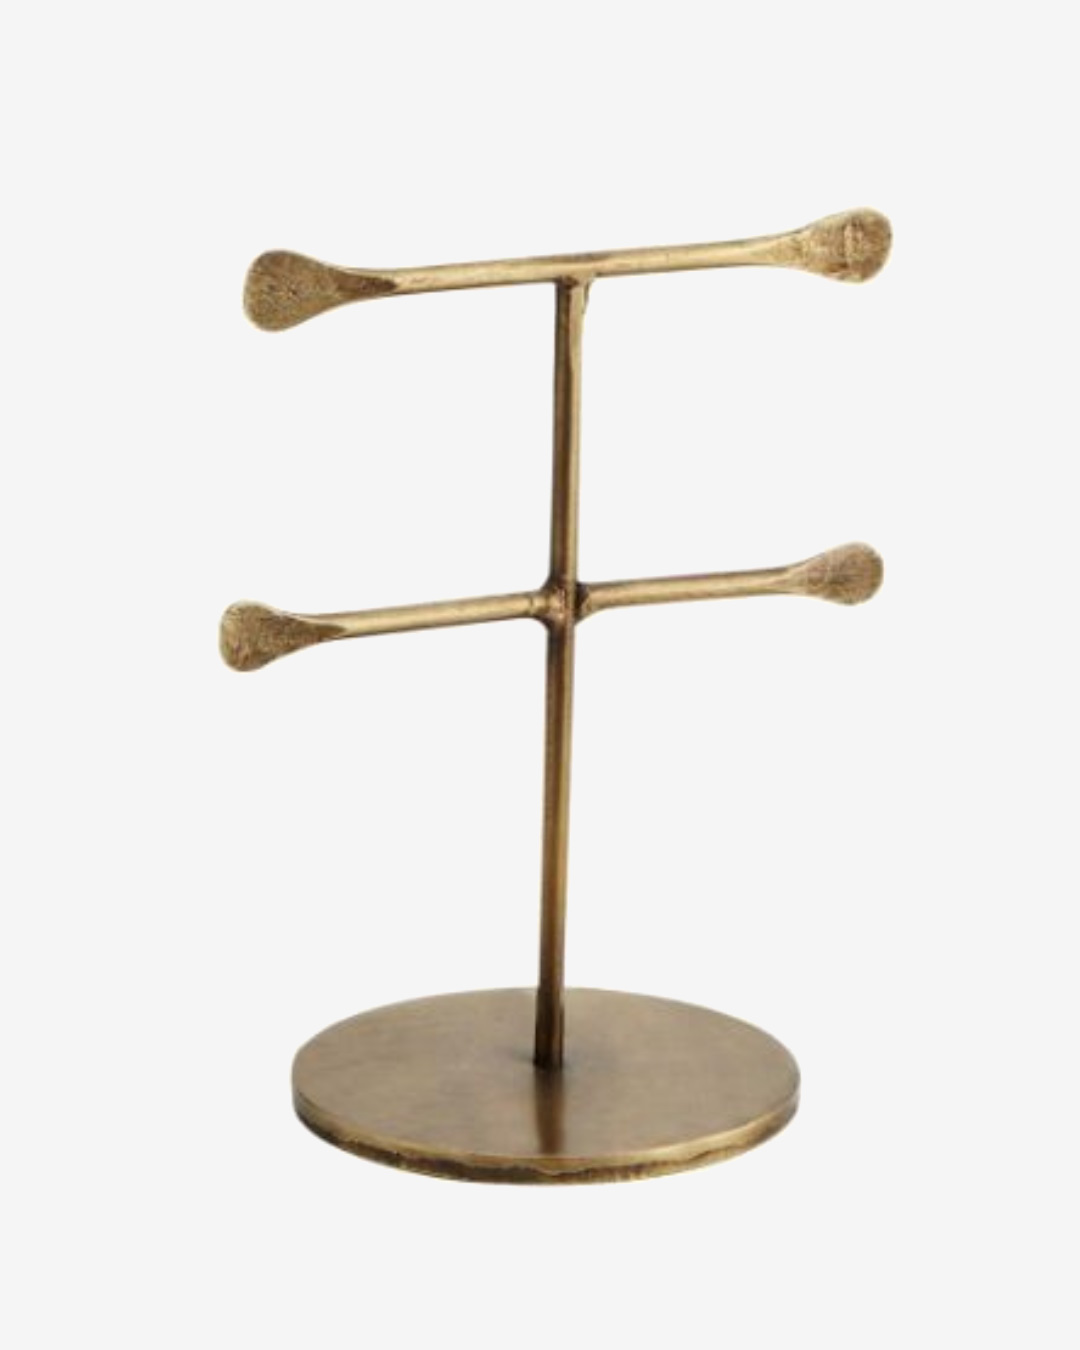 Hand forged jewellery stand in gold